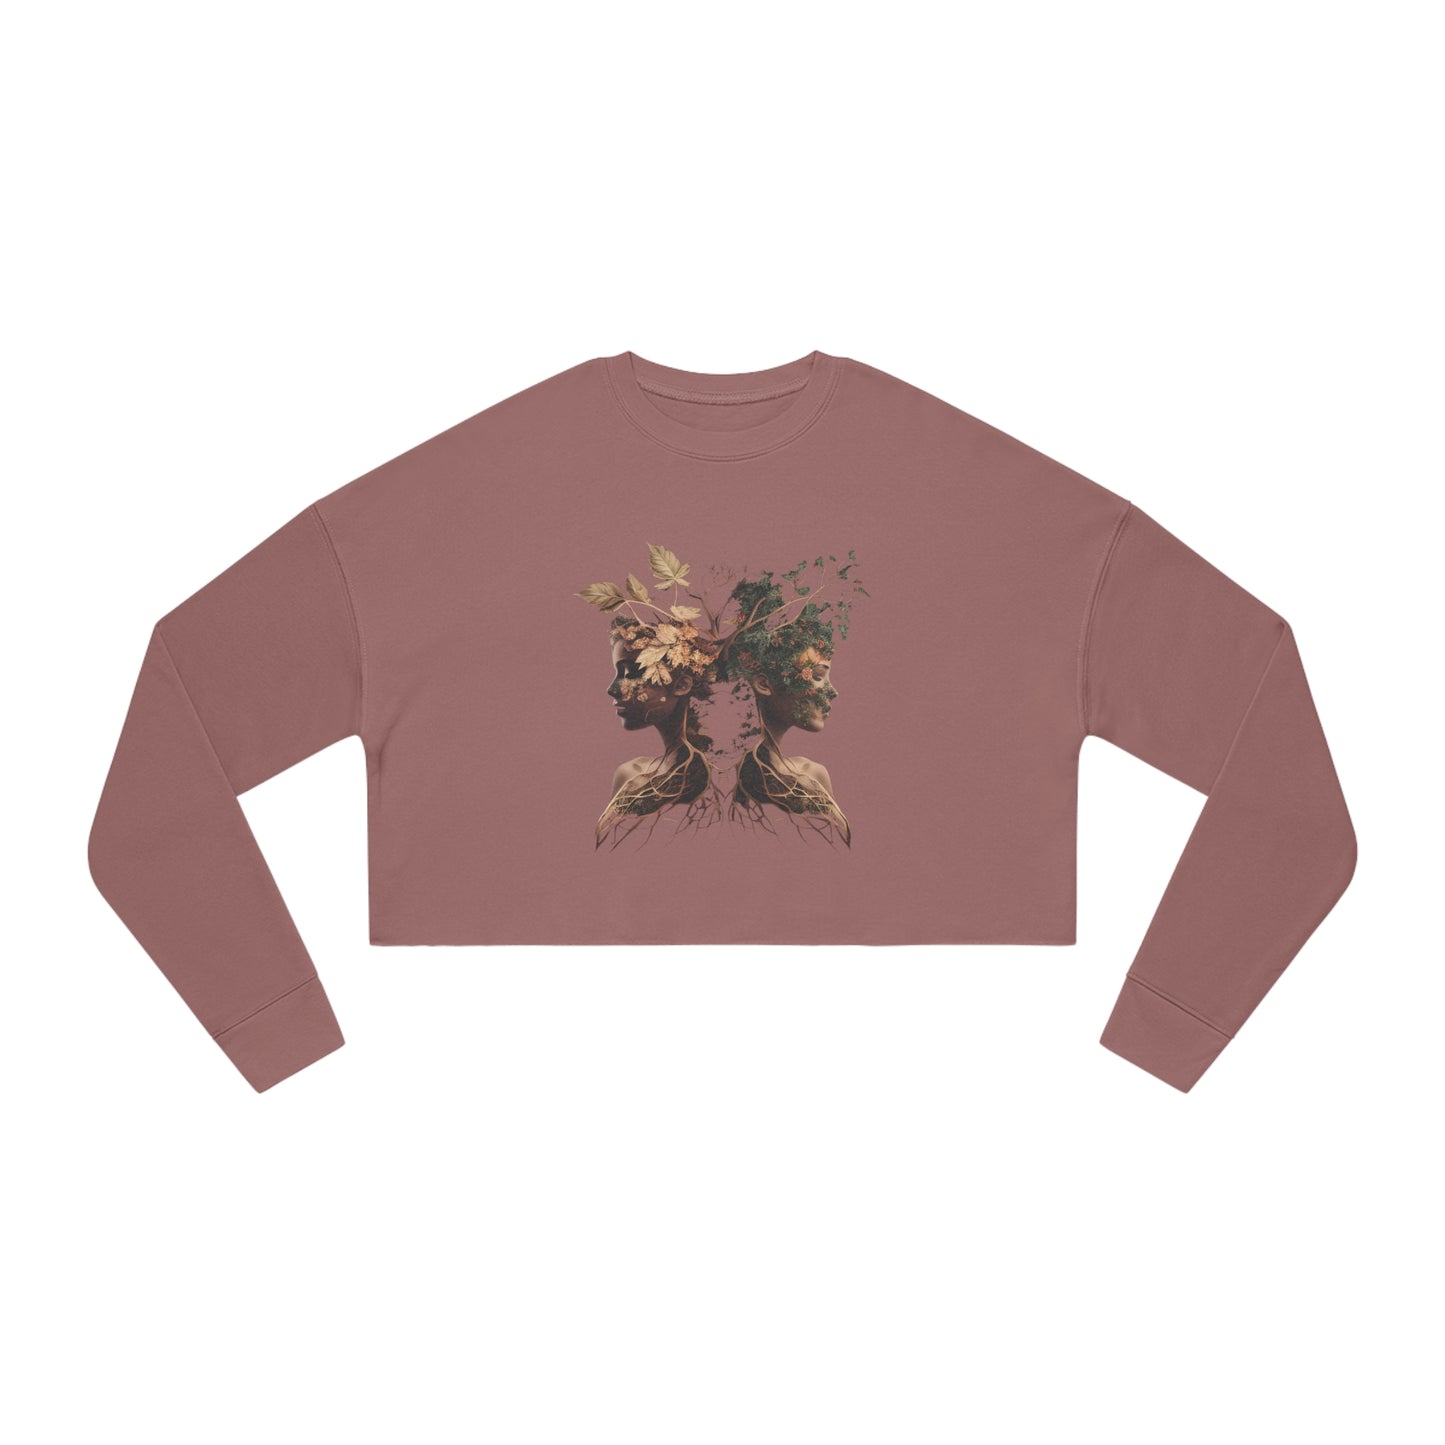 rooted together cropped sweatshirt